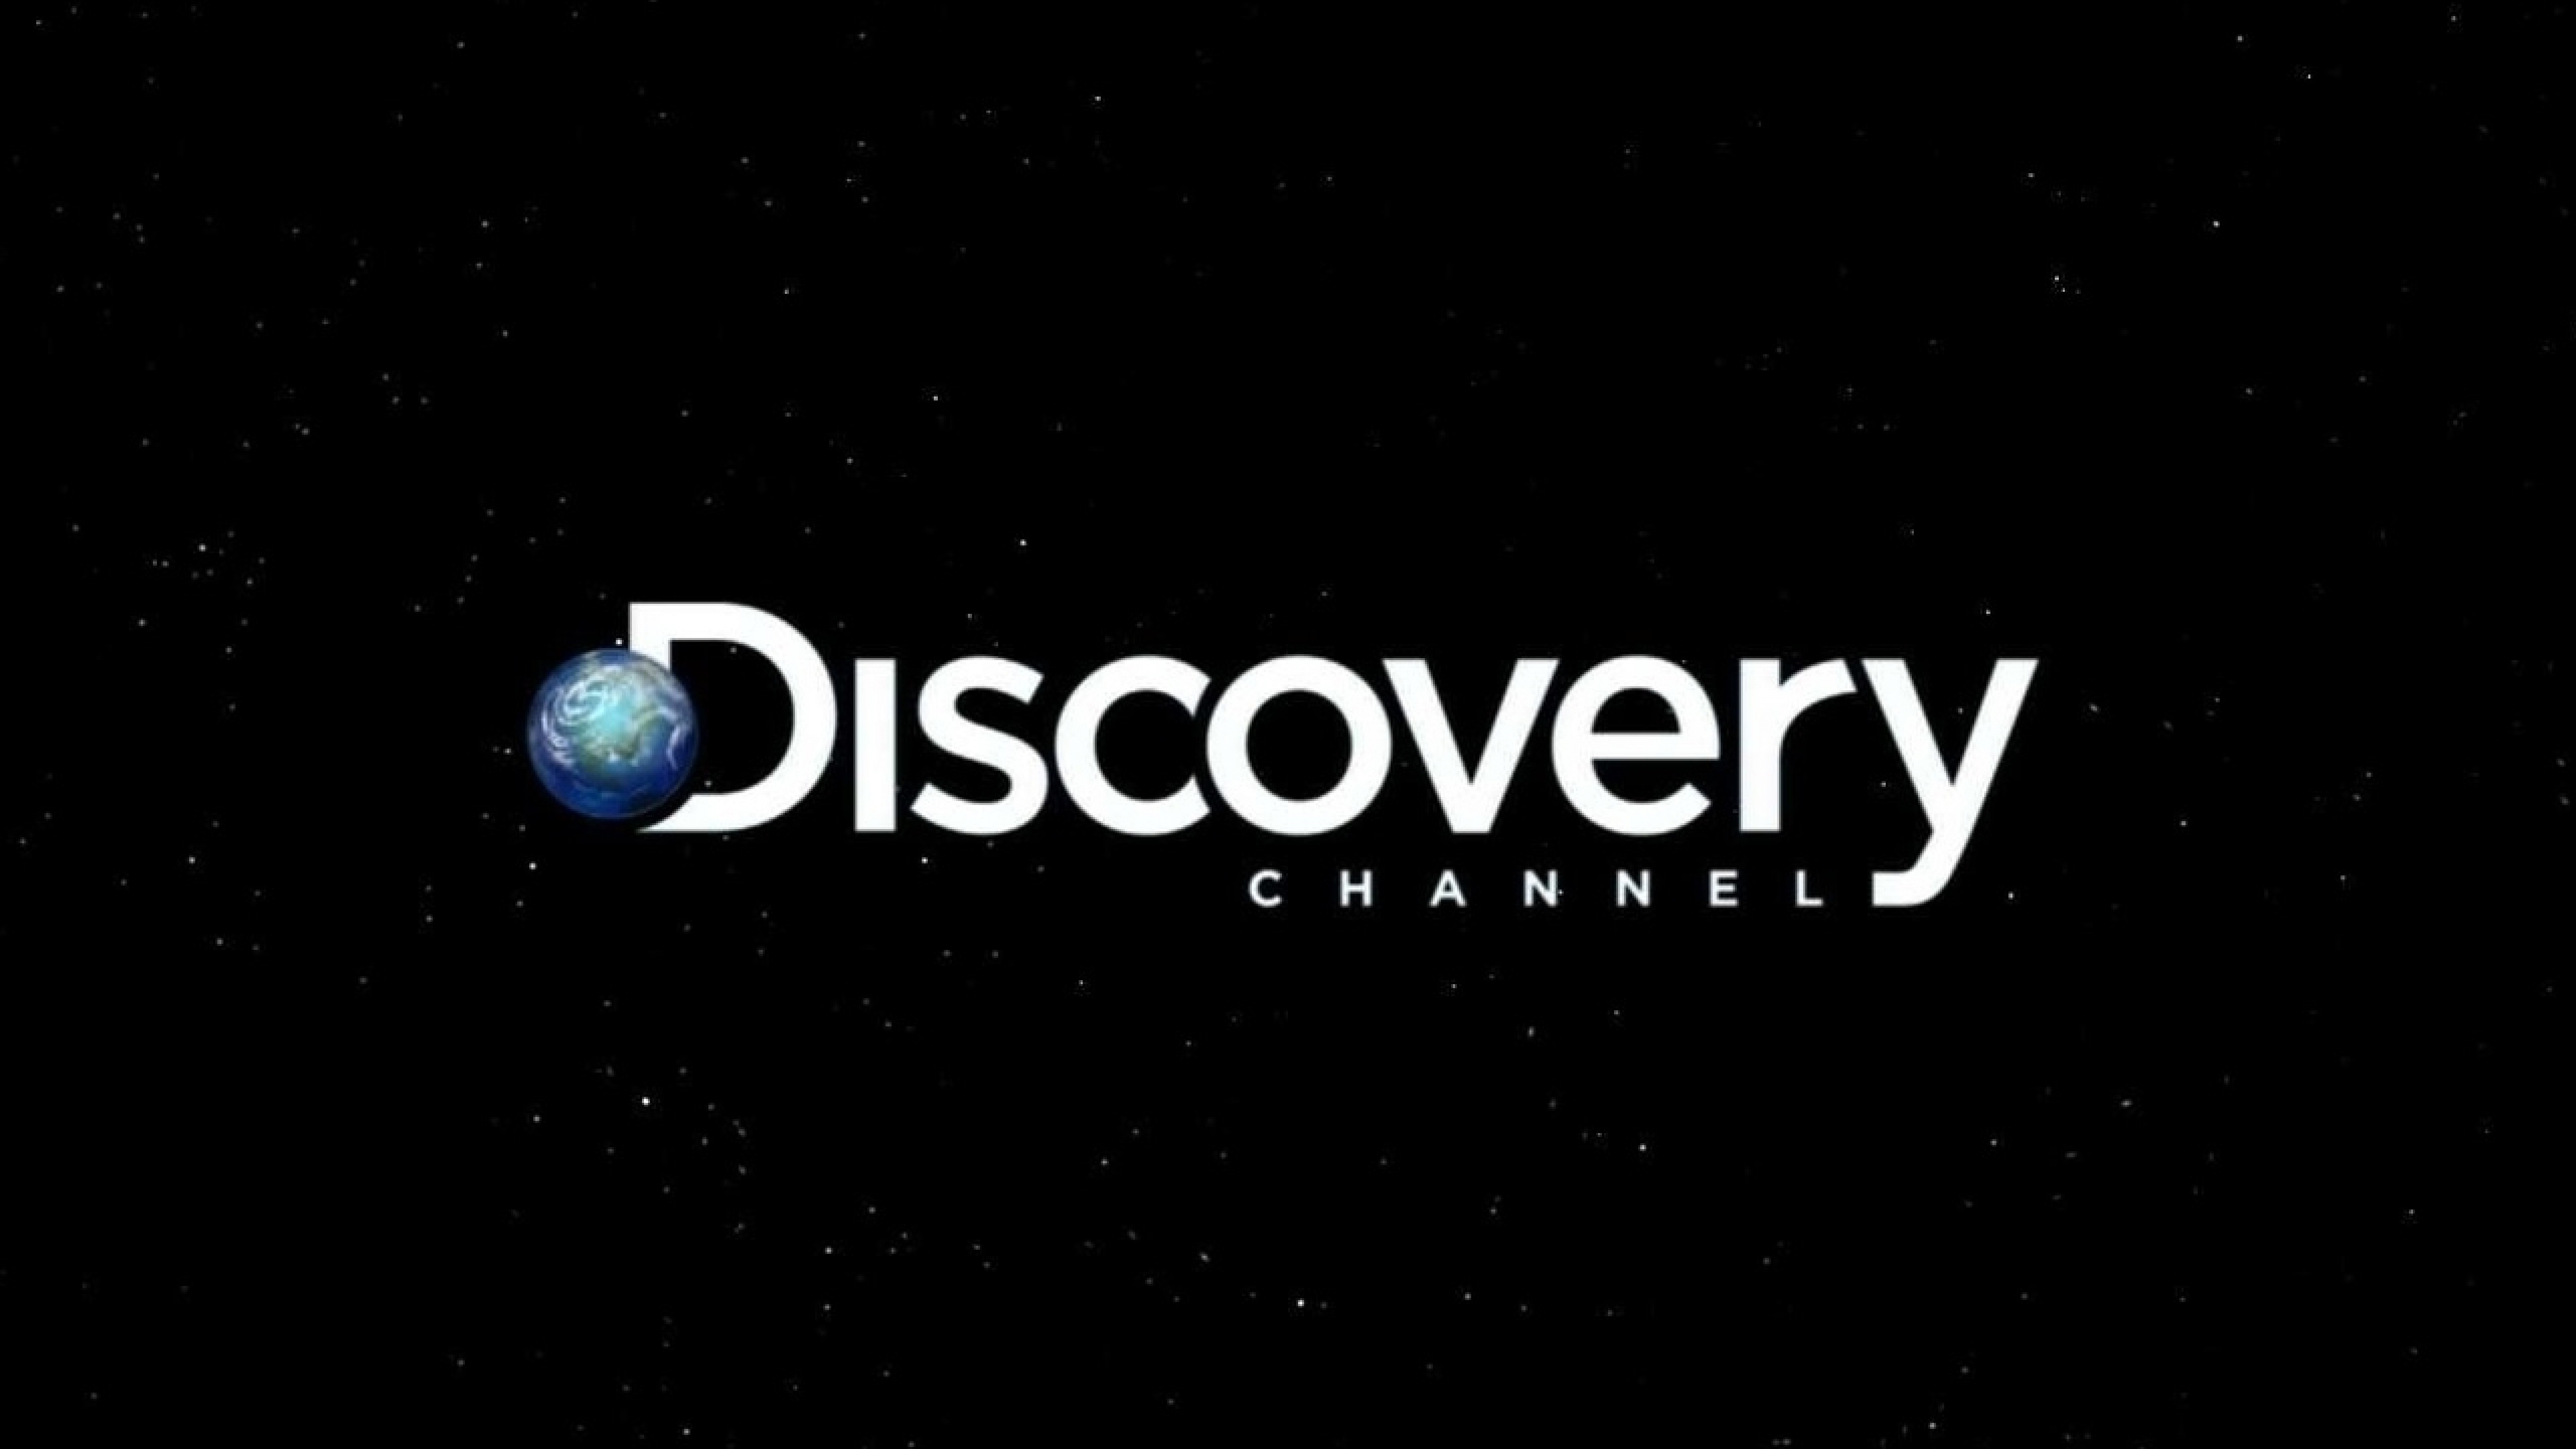 Discovery Channel Wallpaper HD Full Pictures